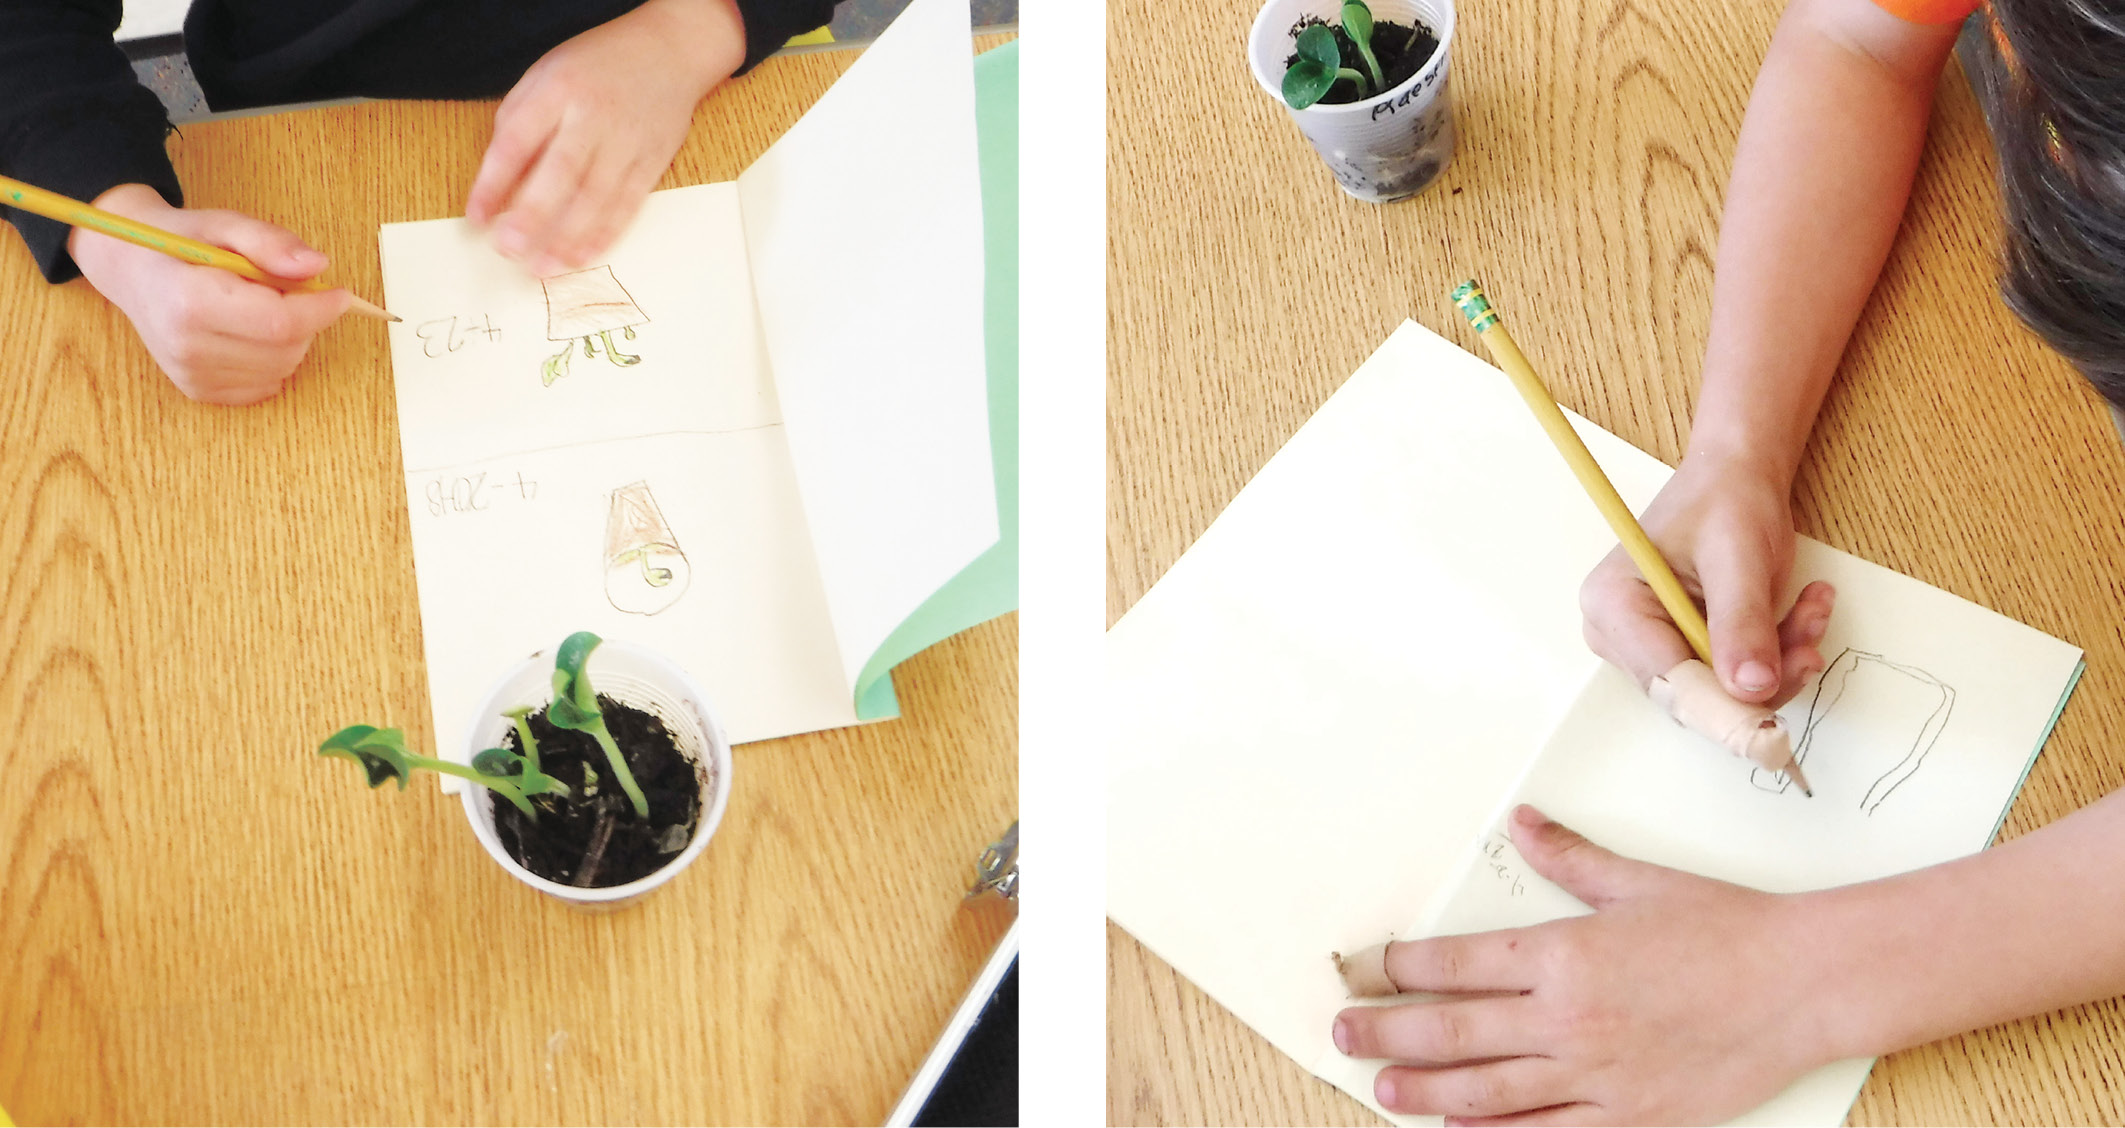 Students planted seeds and observed plant growth.